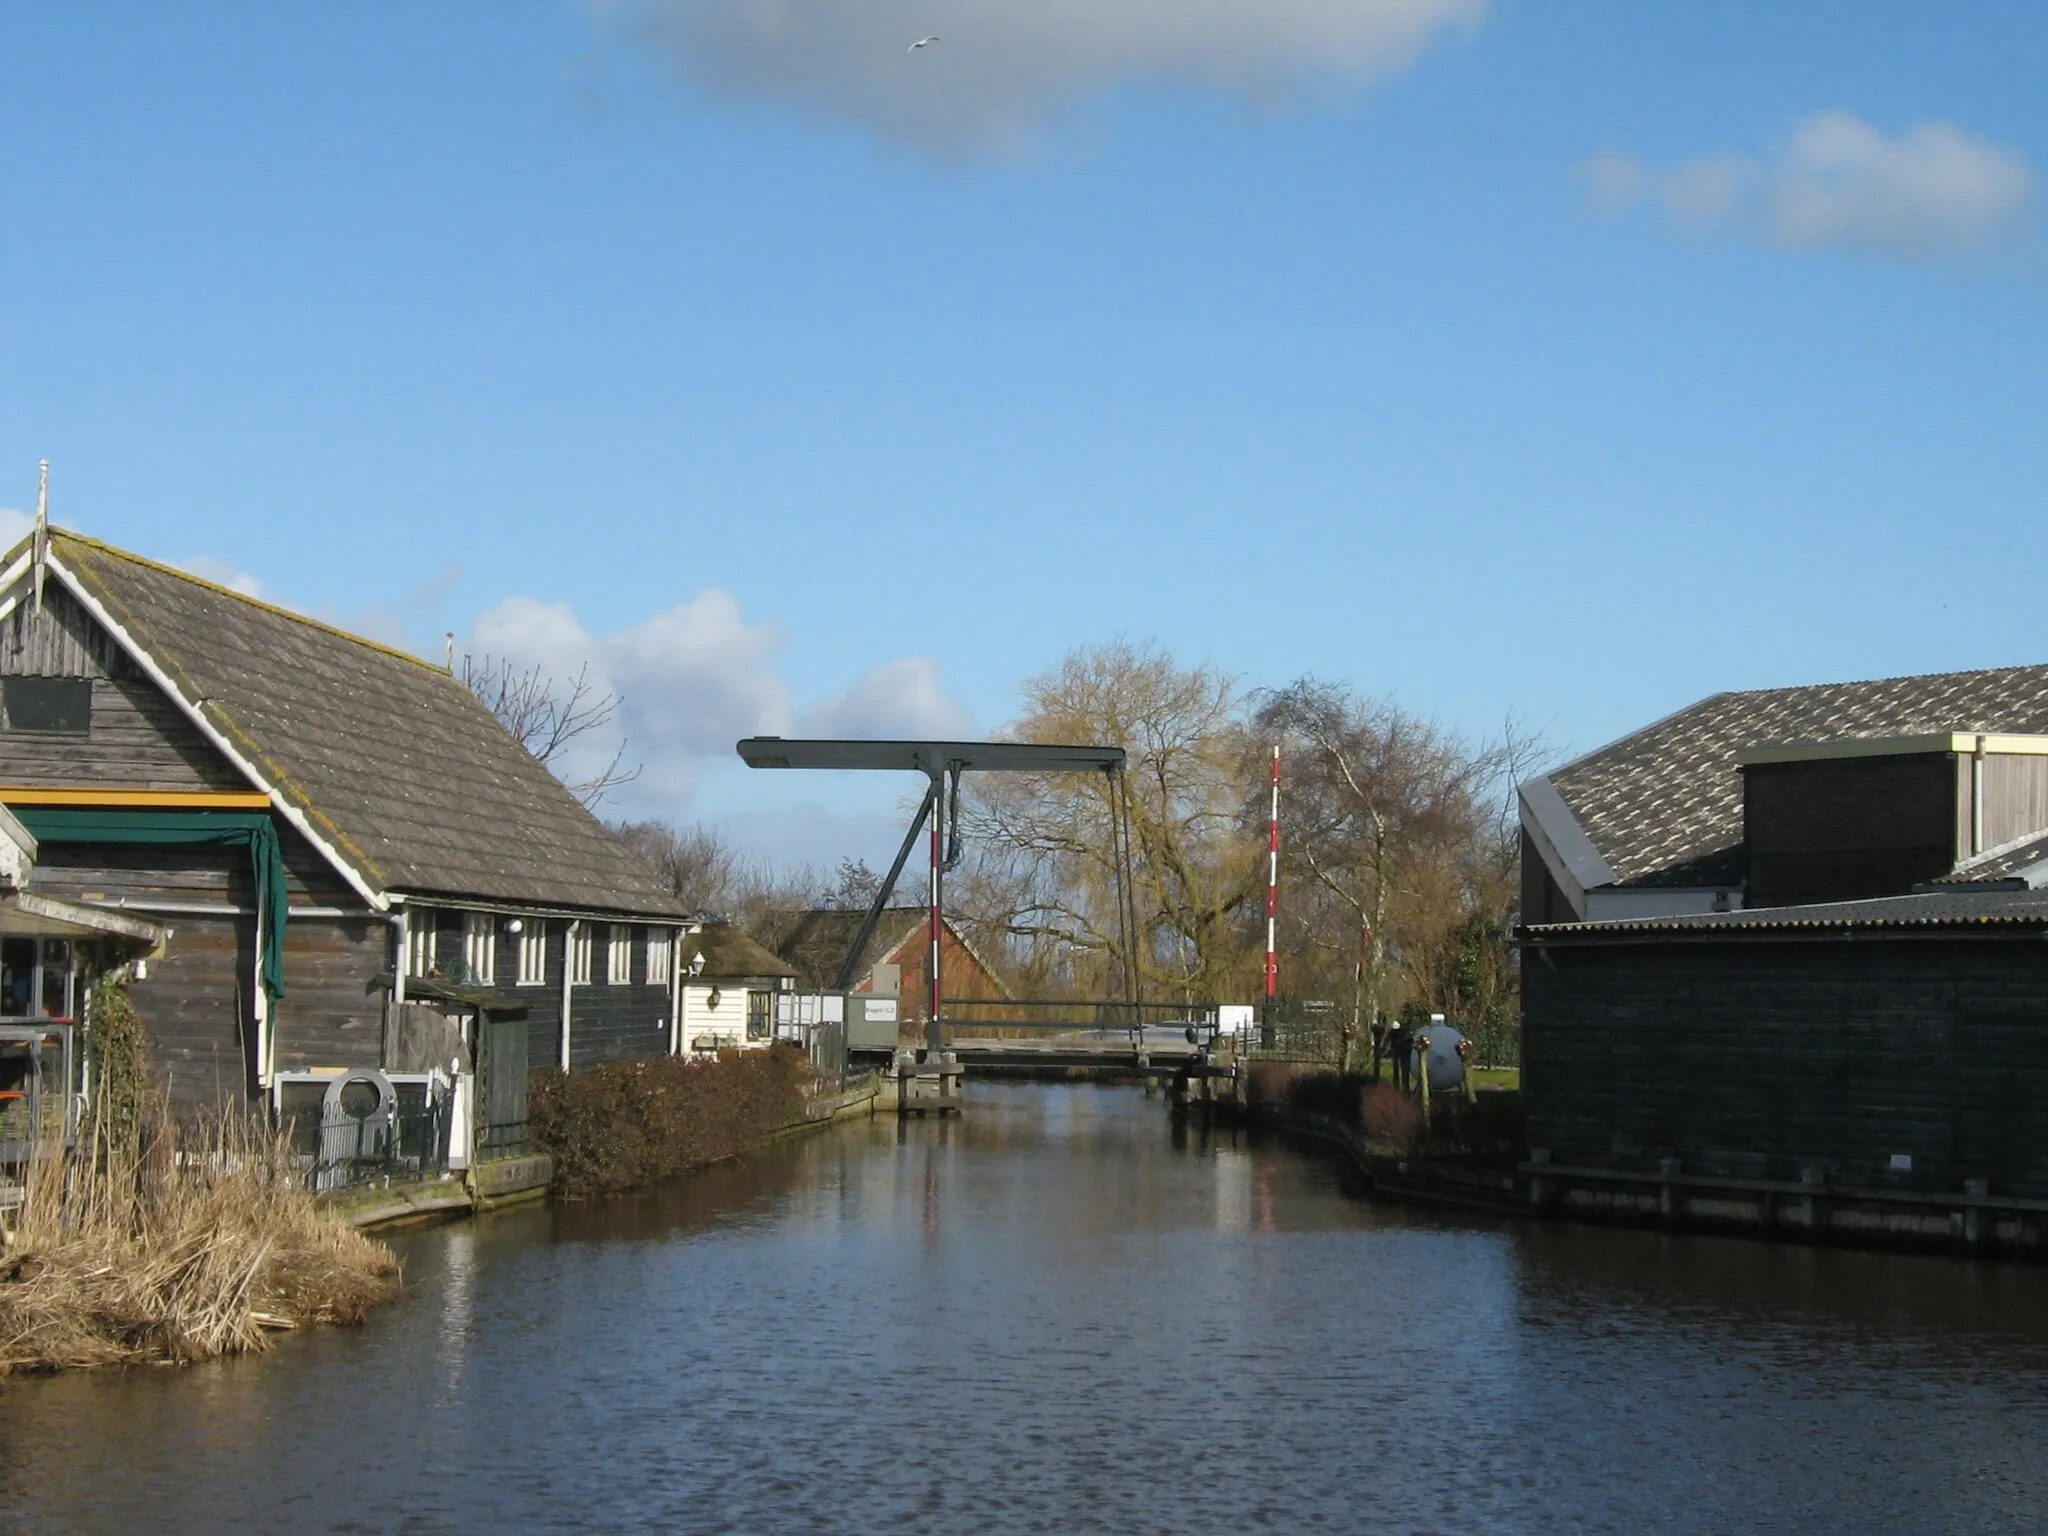 Photo showing: The village of Stokkelaarsbrug, De Ronde Venen municipality, the Netherlands. There are two bridges in the village; the one shown (from the south) is the northwestern one.